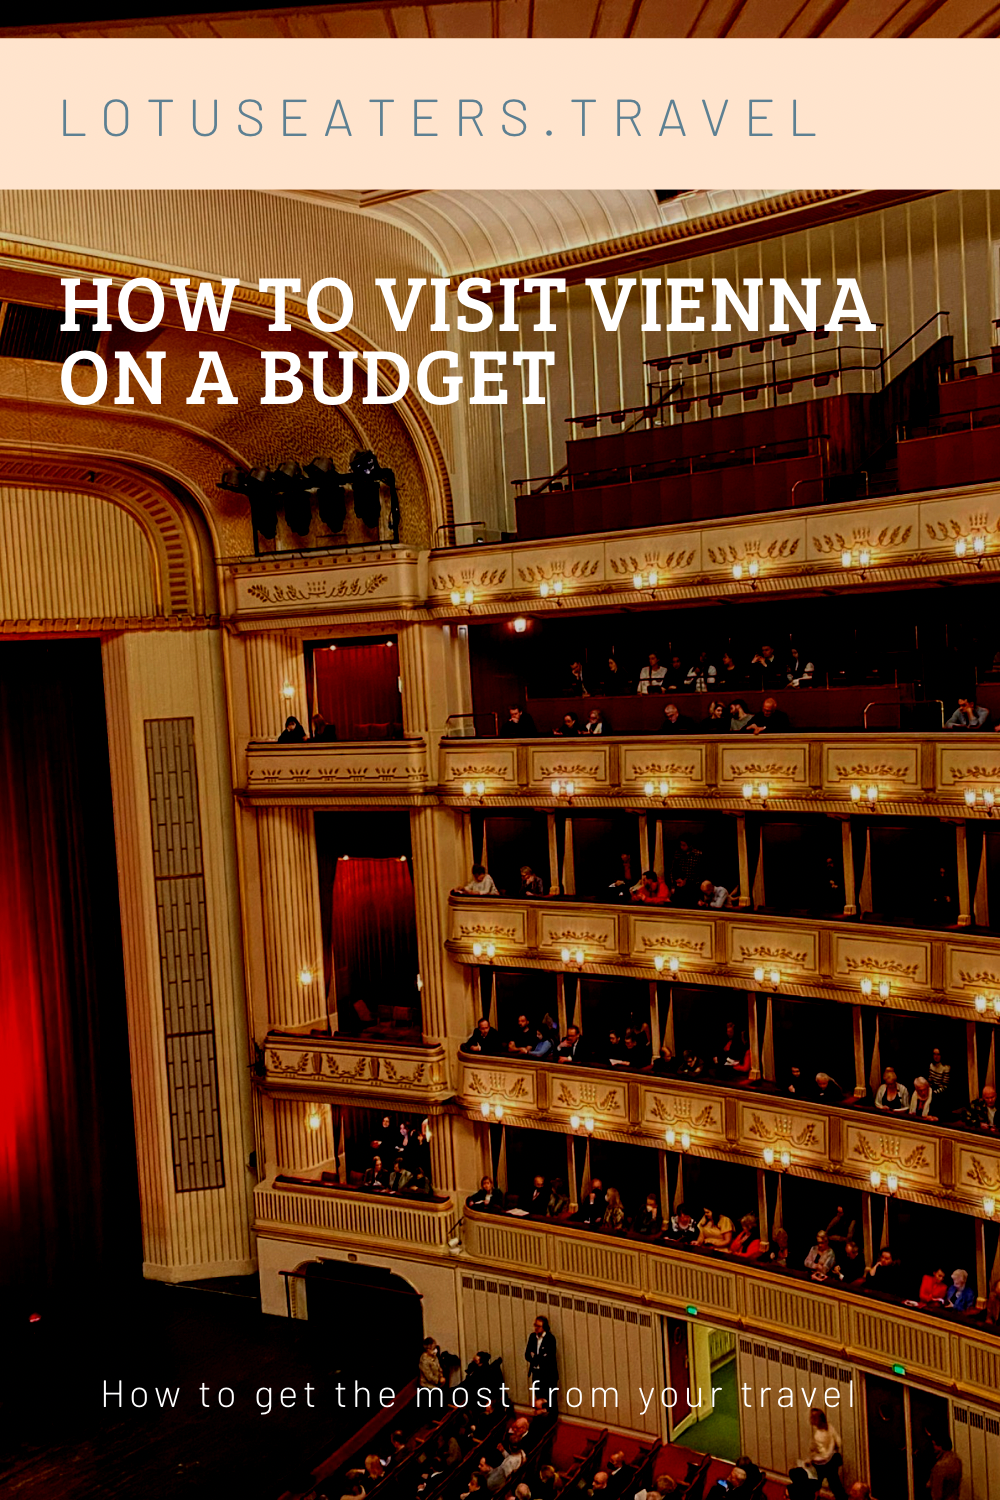 Visiting Vienna on a budget